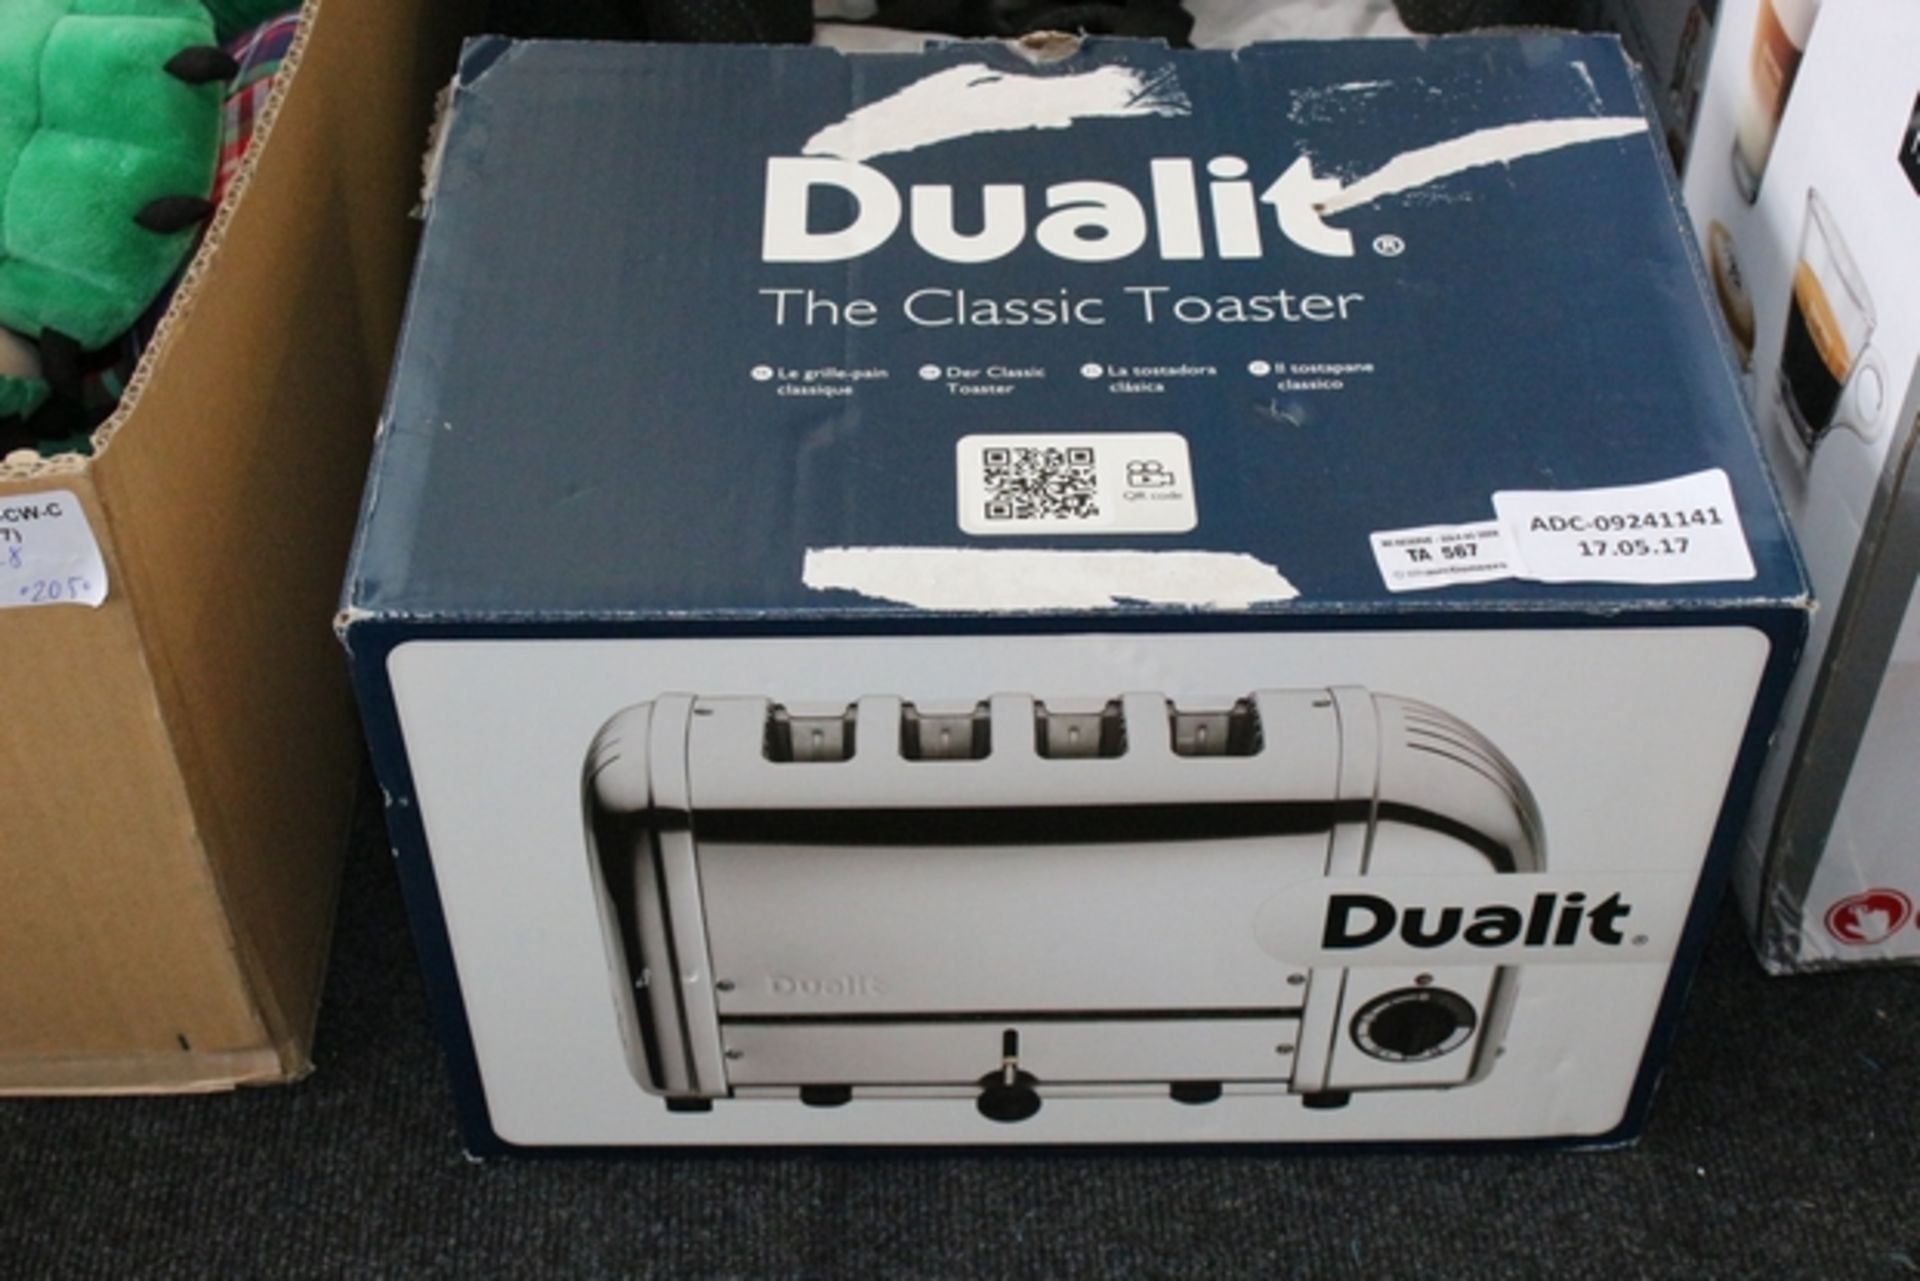 1X BOXED DUALIT THE CLASSIC 4 SLICE TOASTER RRP £120 (ADC-09241141) (17/05/17)